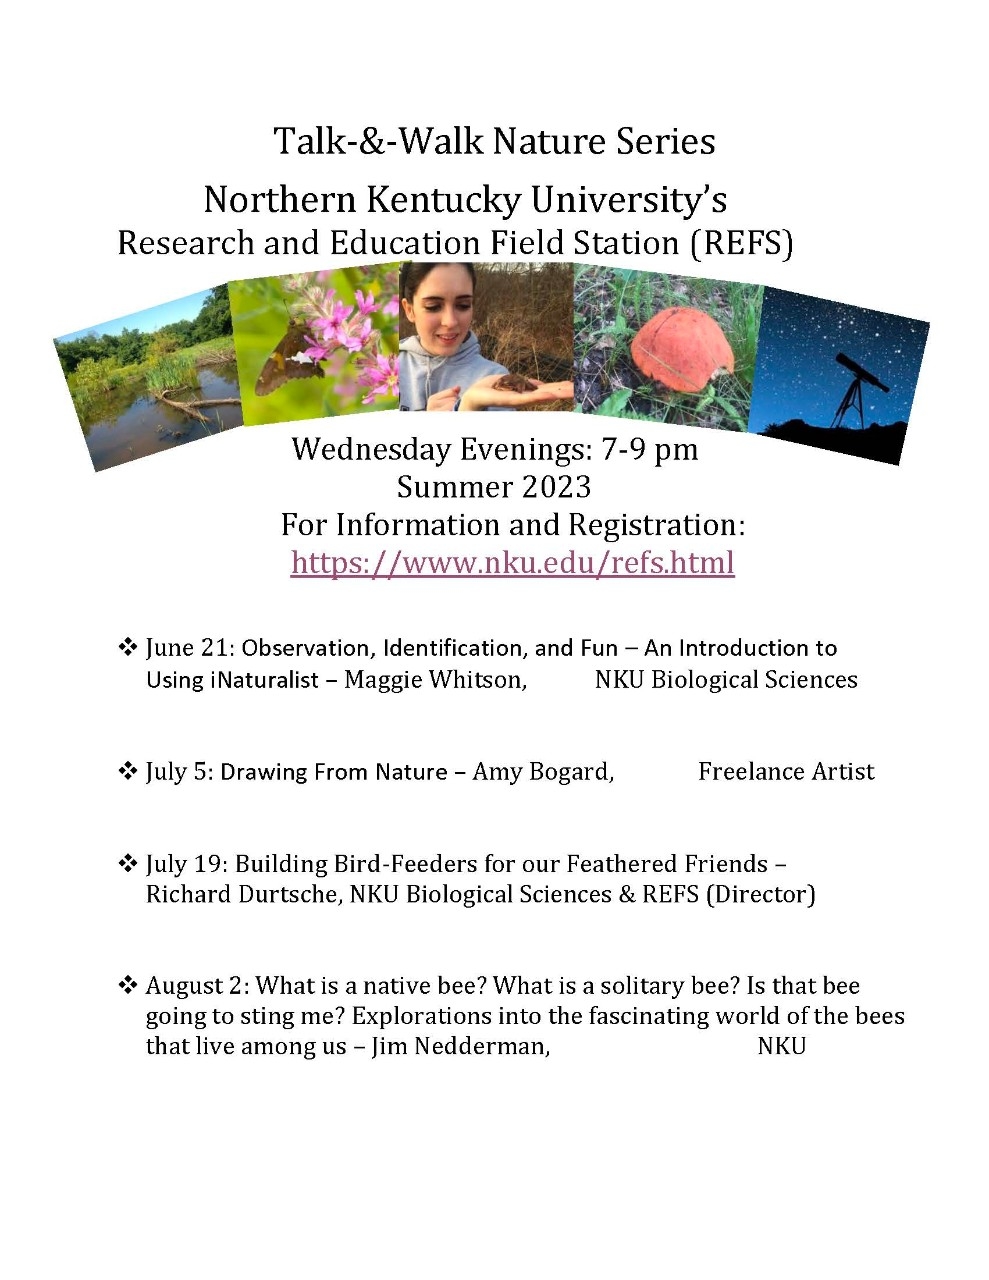 A schedule of the Talk-&-Walk Nature Series for NKU REFS